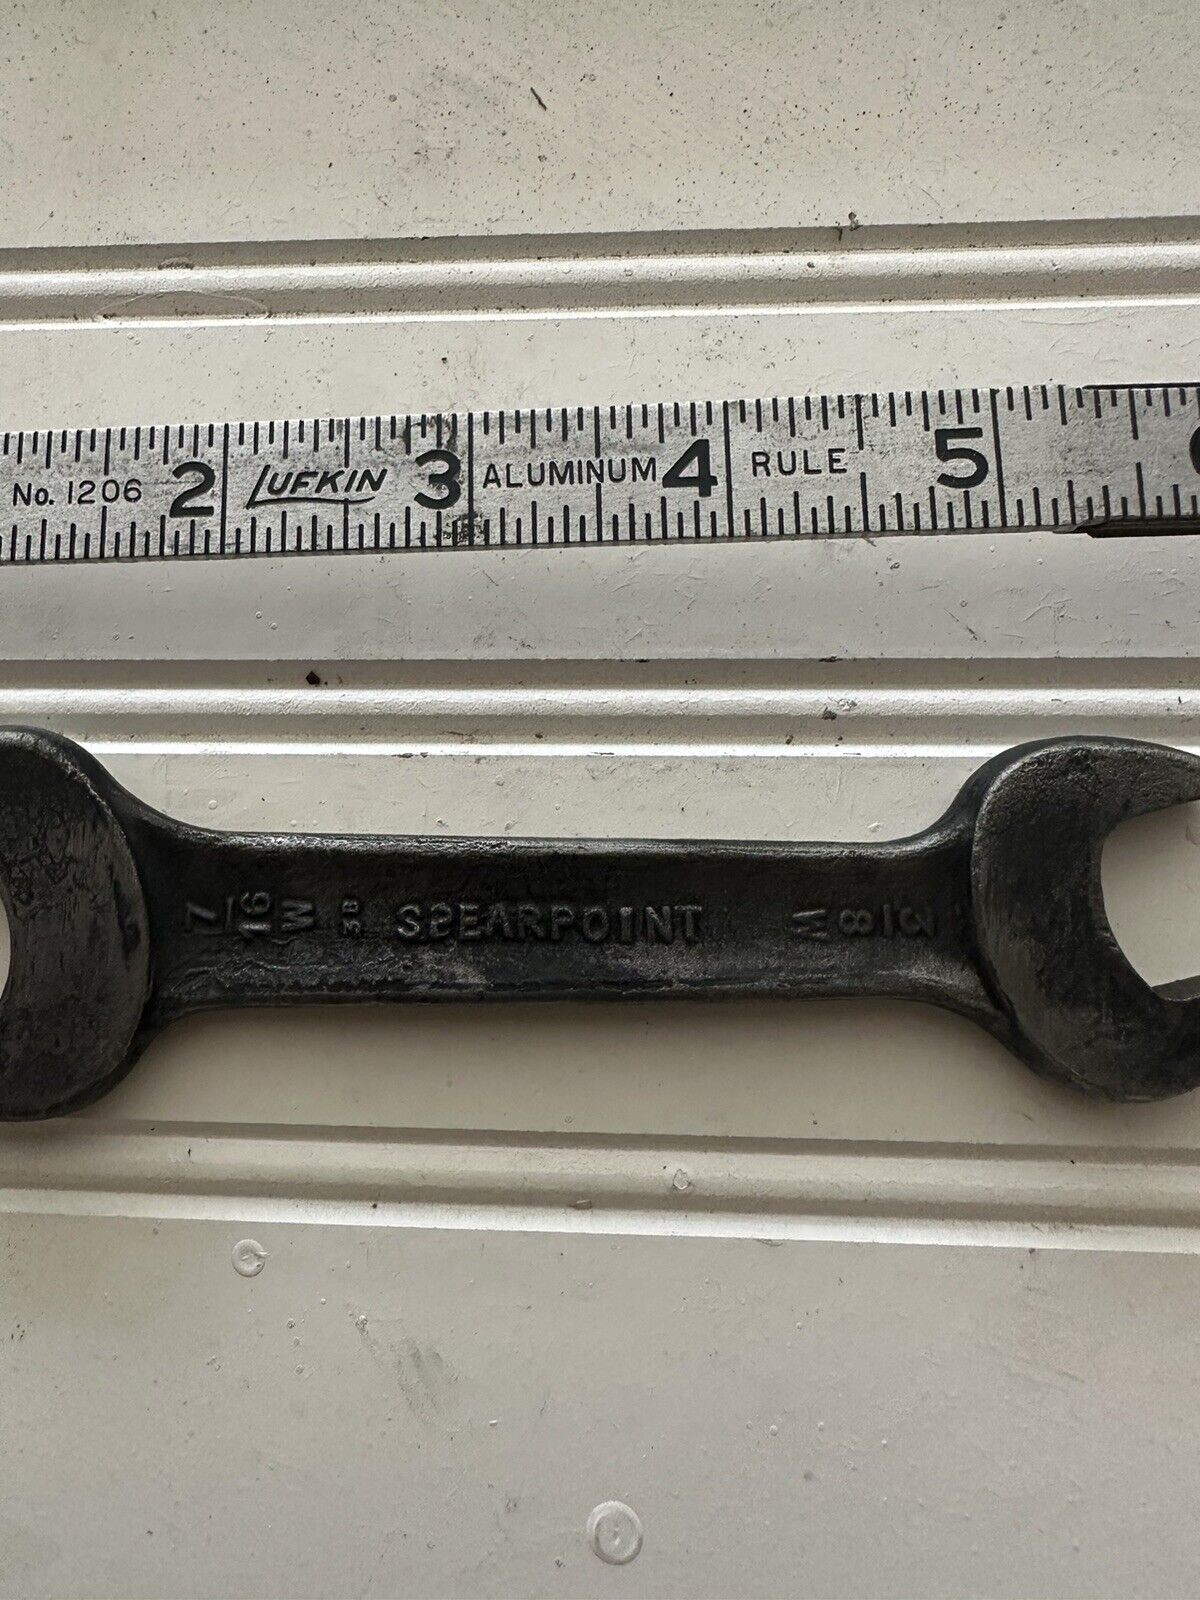 Made In England, 1/2 X 7/16 BSF - 3/8 X 7/16 W, BSF/Whitworth dbl. end wrench.